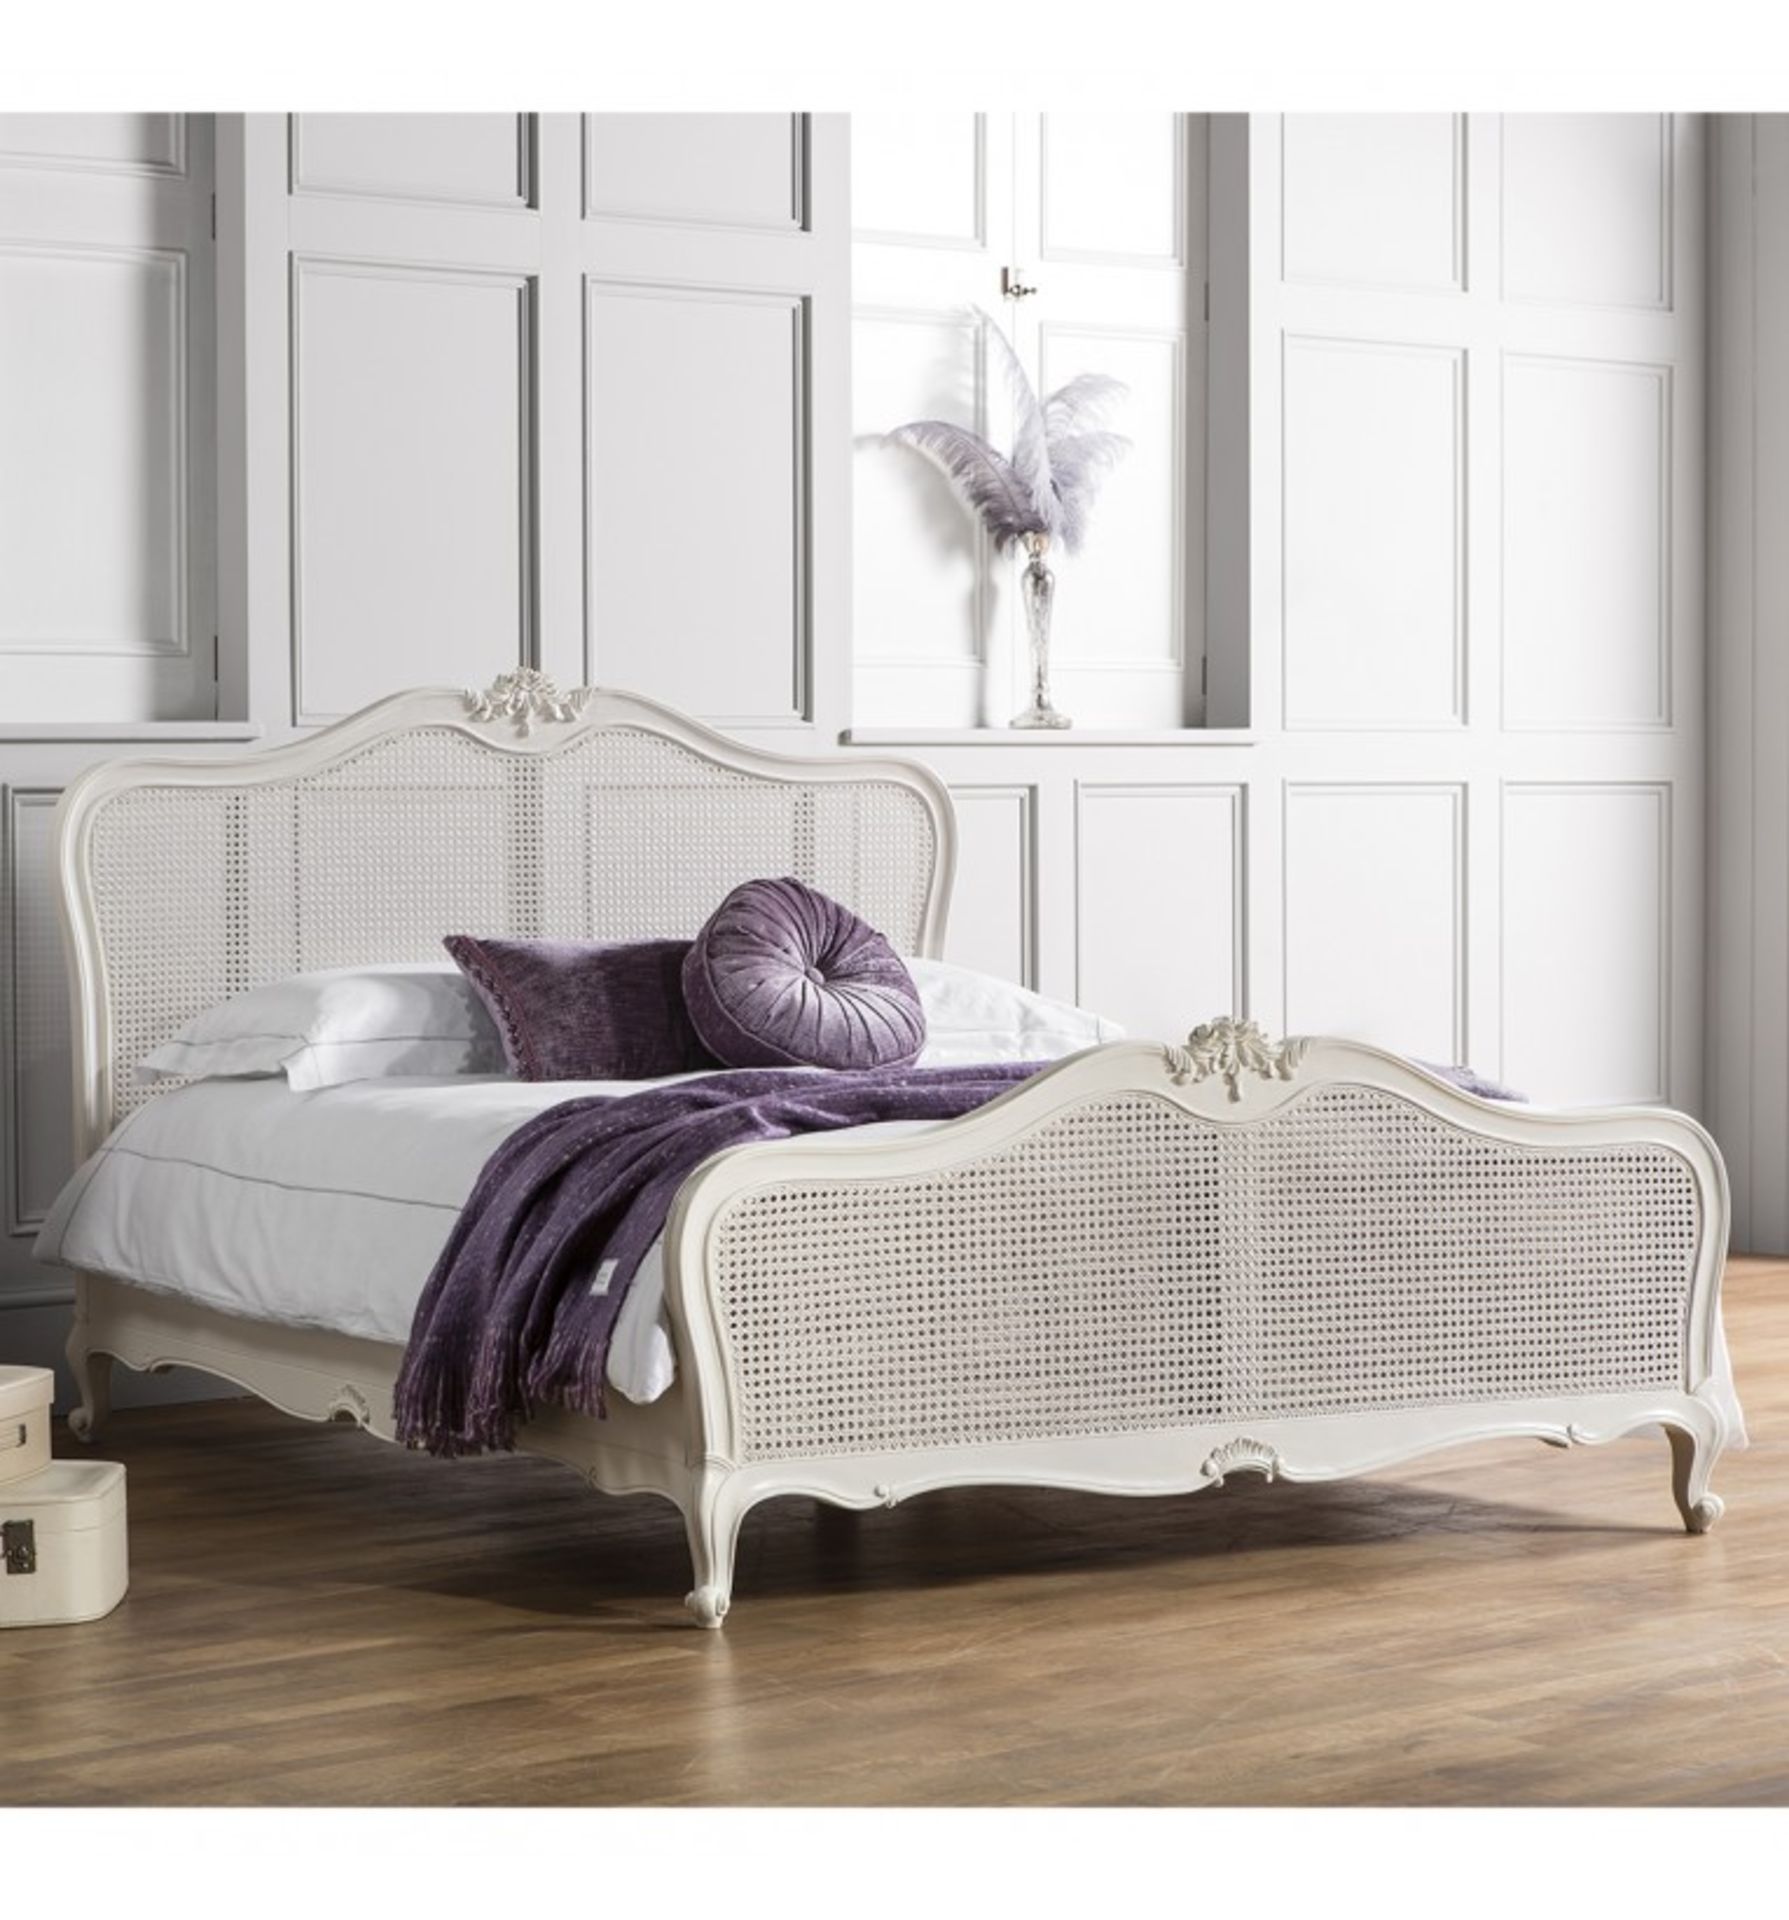 Chic 6' Cane Bed Vanilla White Applied by hand , the calming Vanilla White paint adds a feminine